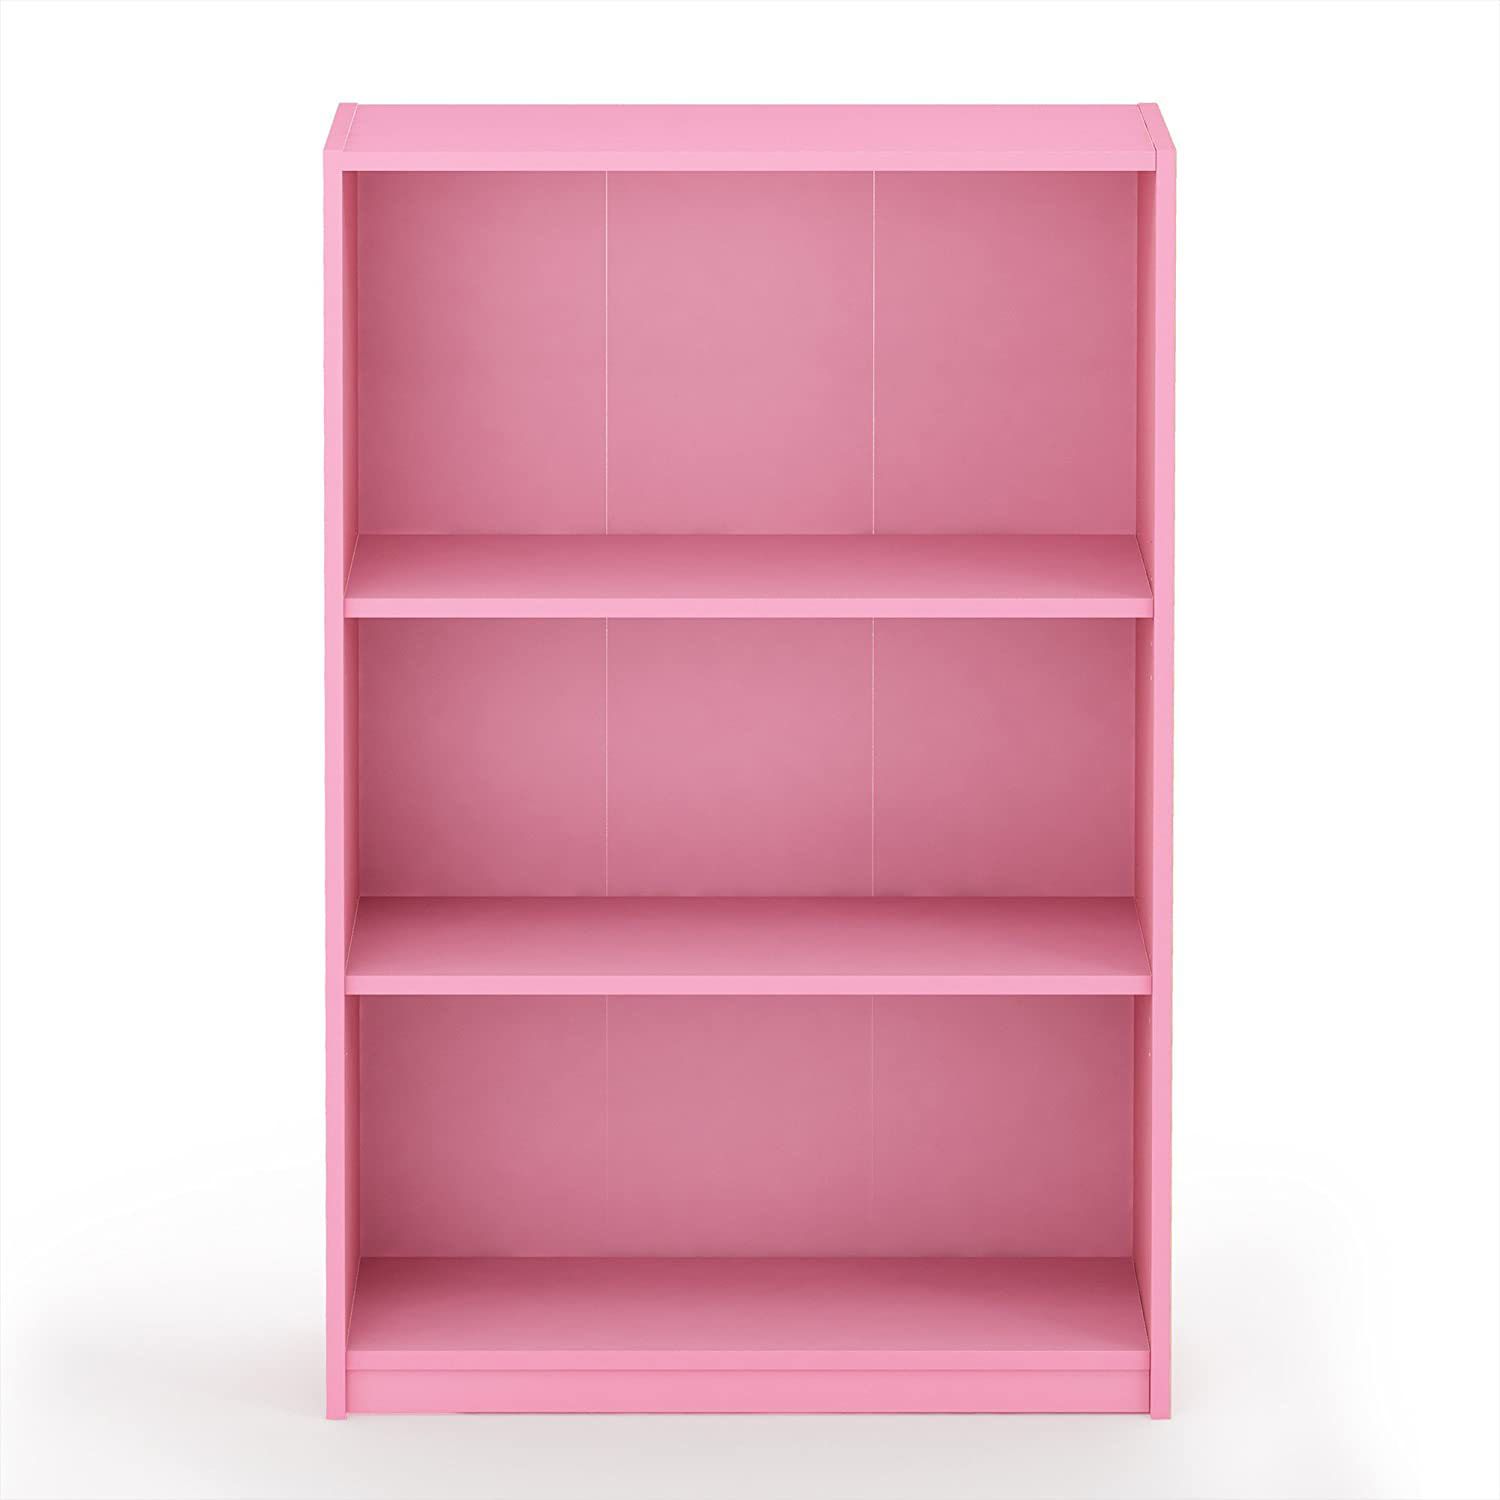 Furinno Jaya Simple Home 3 Tier Adjustable Shelf Bookcase, Pink –  Walmart With Light Pink Bookcases (View 9 of 15)